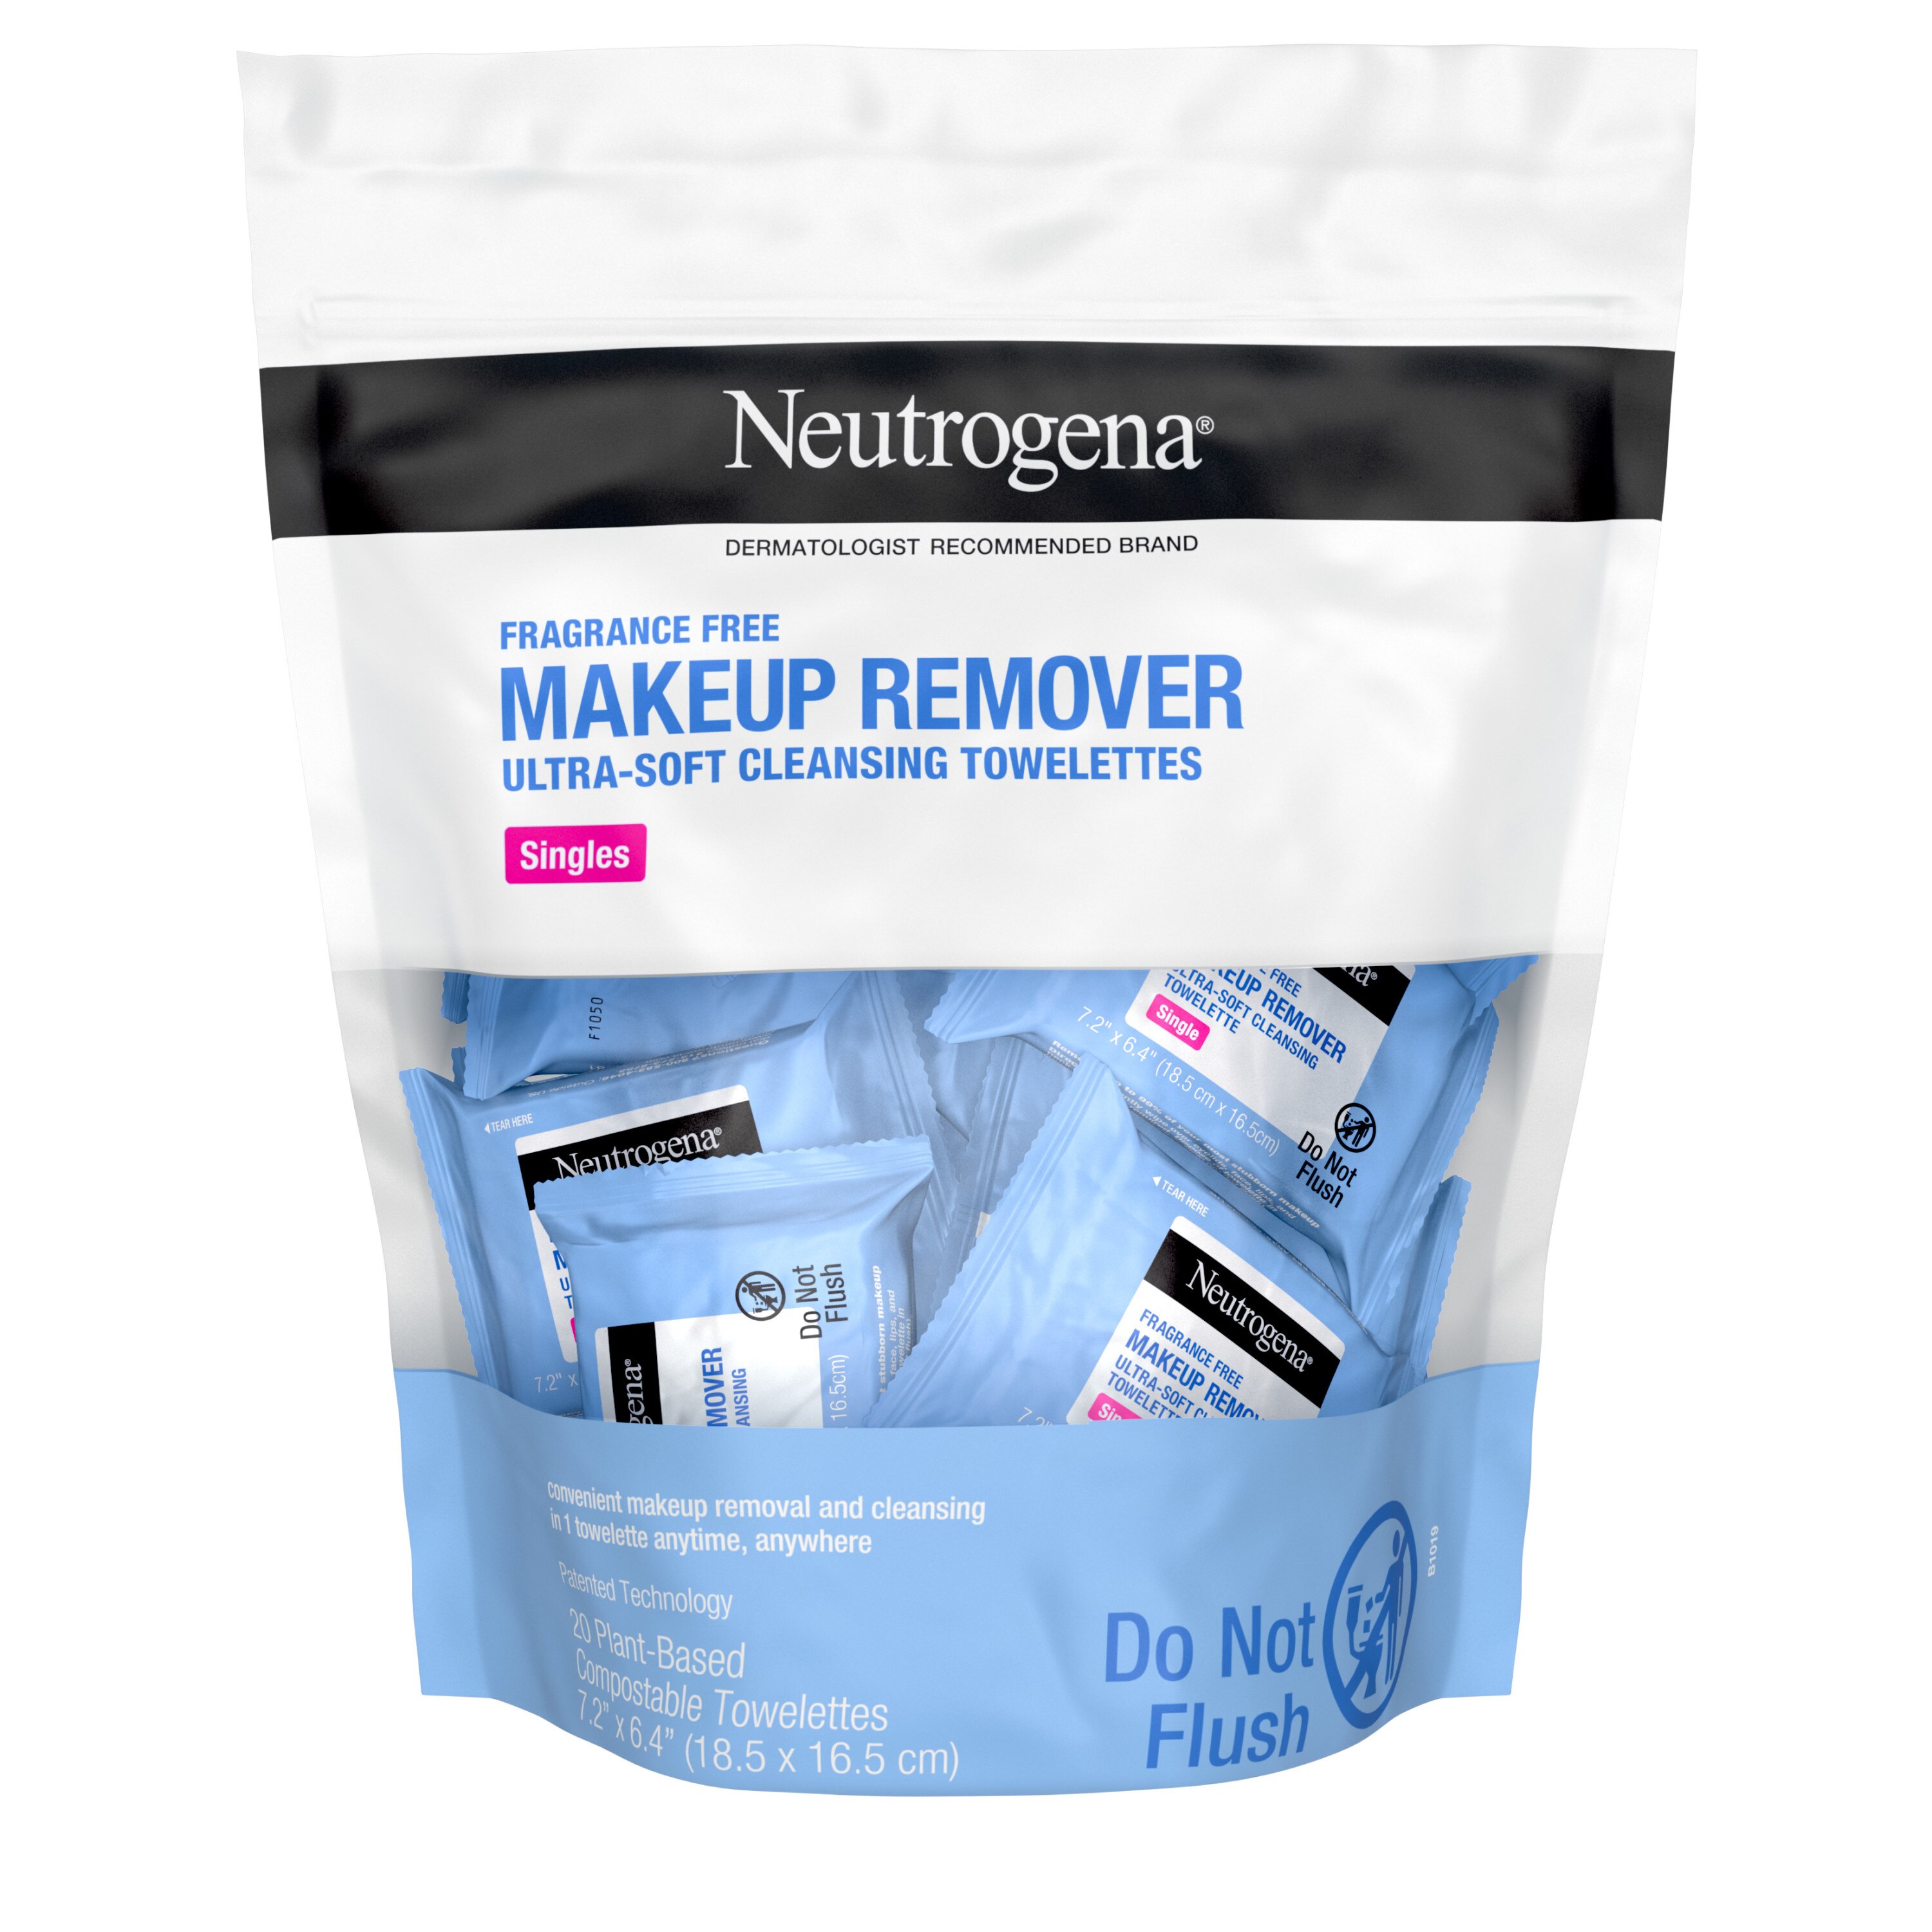 Neutrogena Fragrance-Free Makeup Remover Face Wipe Singles, 20CT